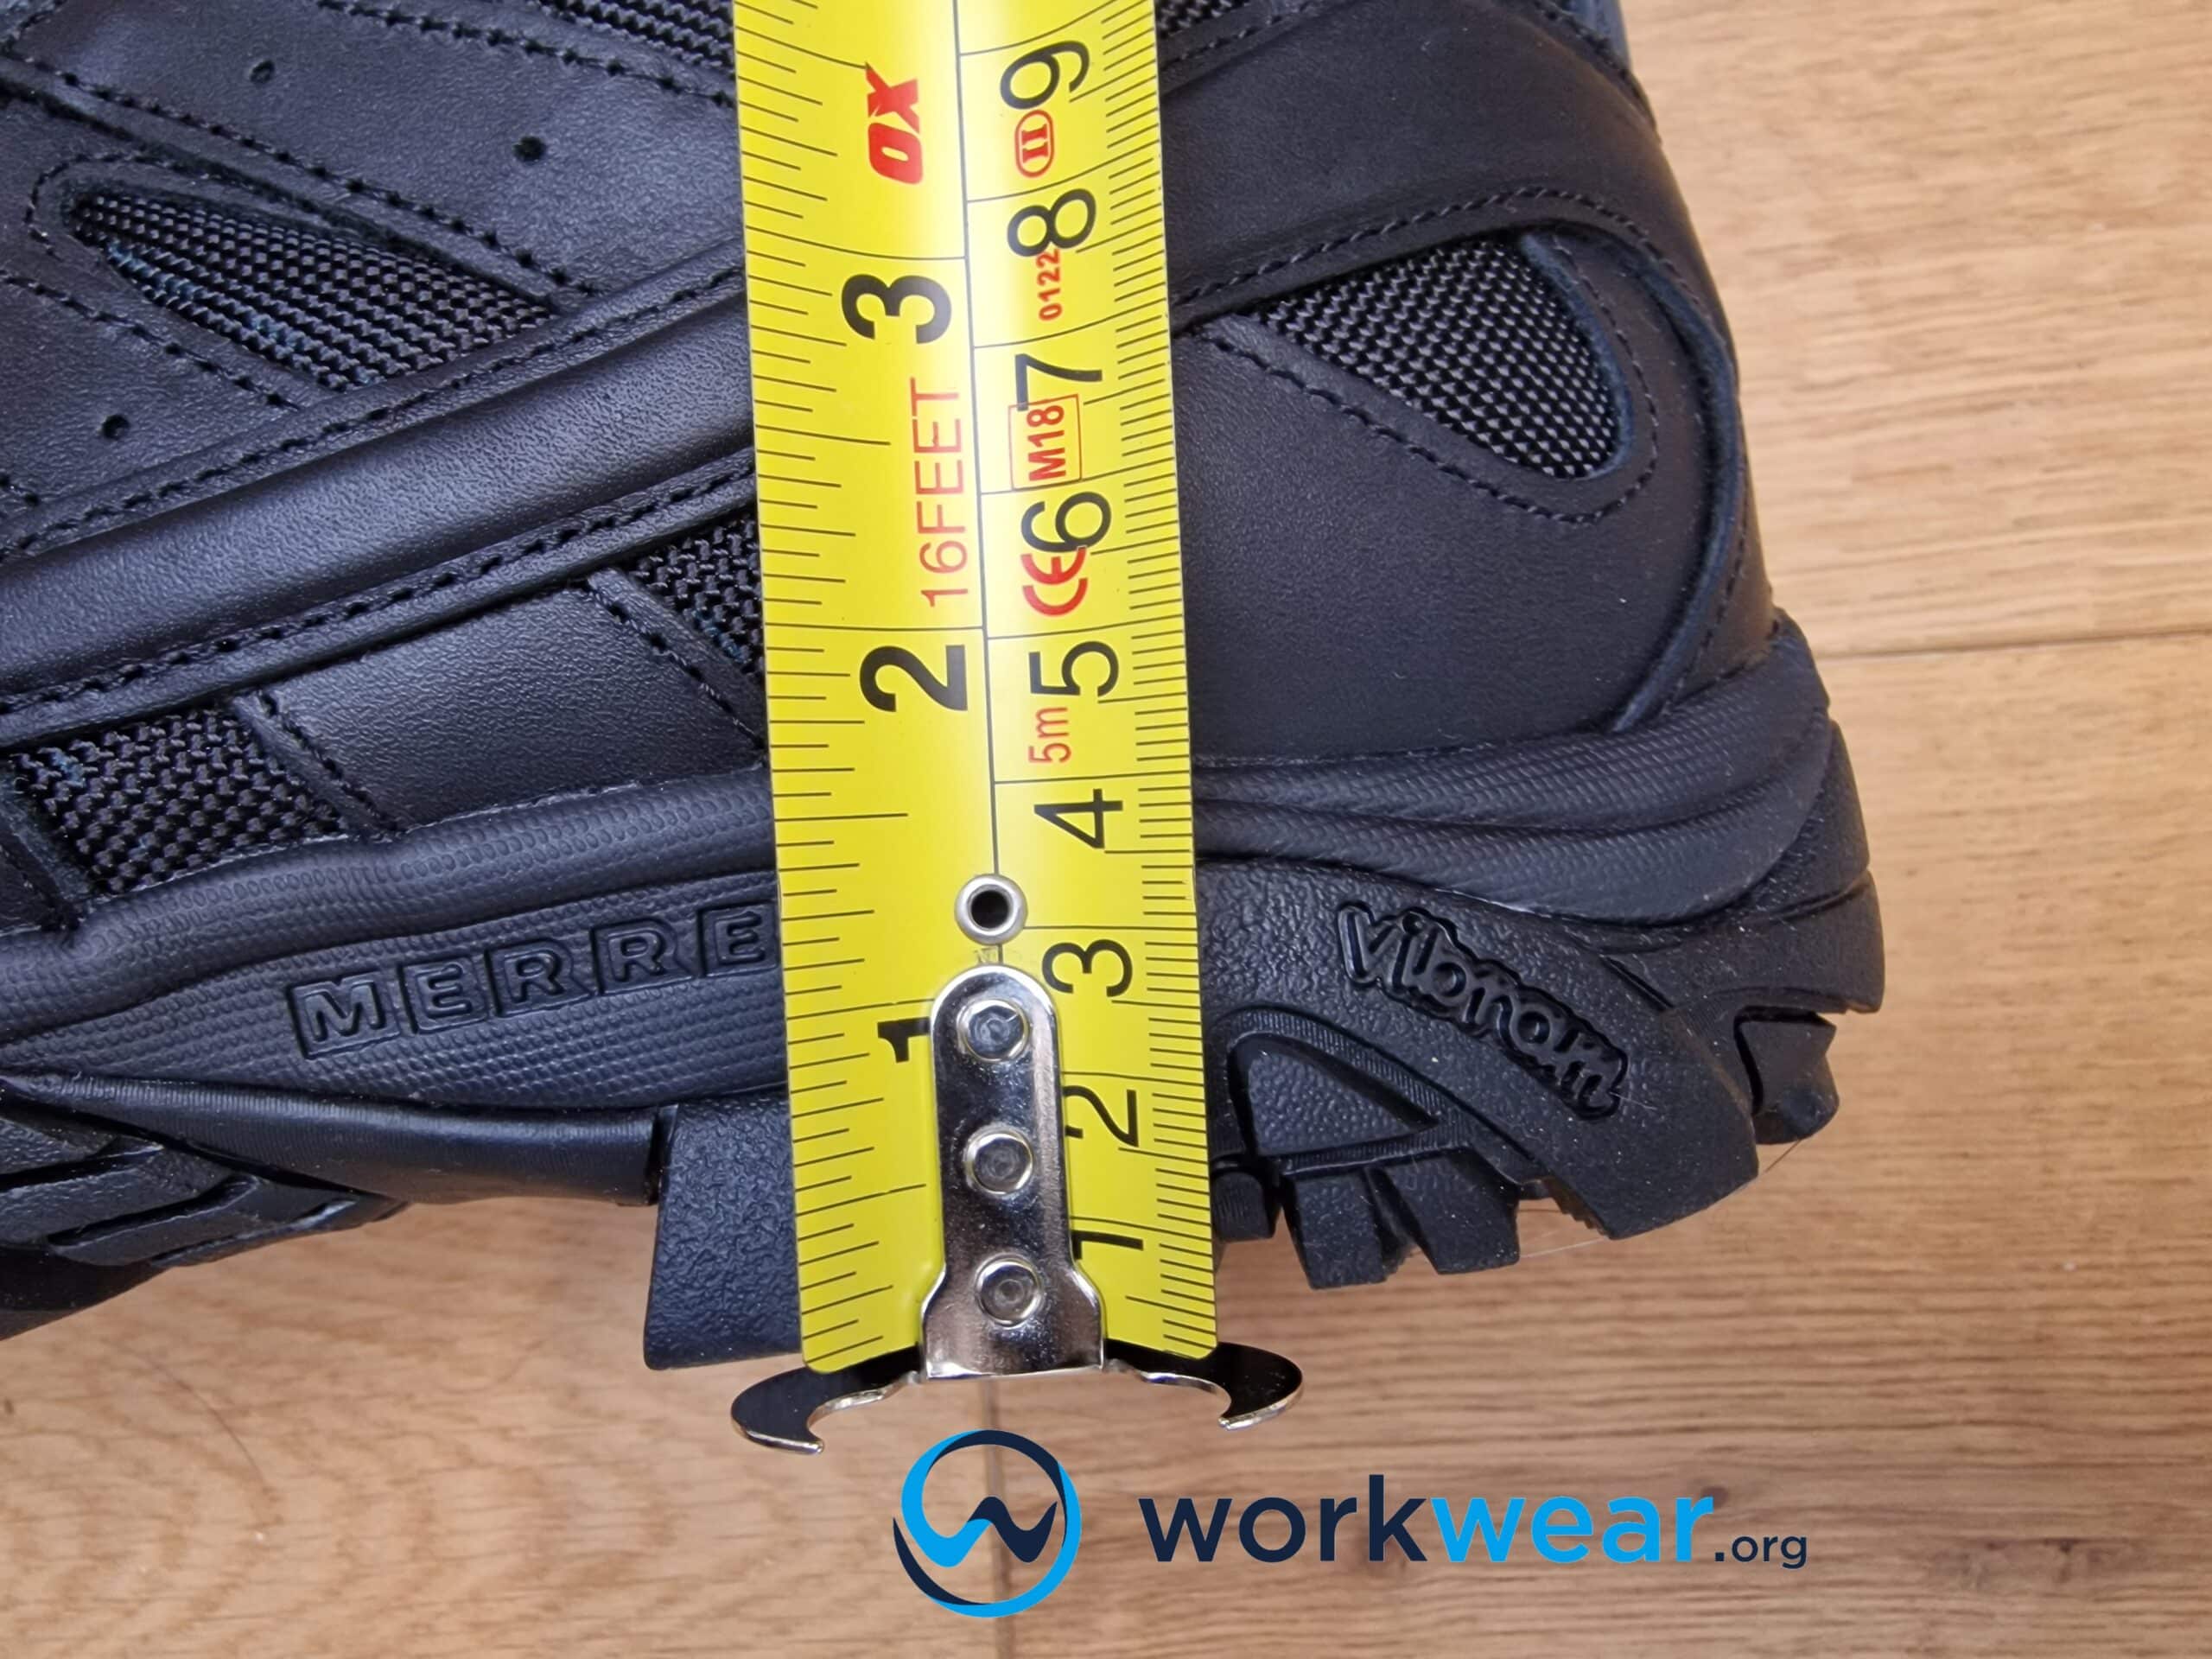 PU Soles Explained | WorkWear.org